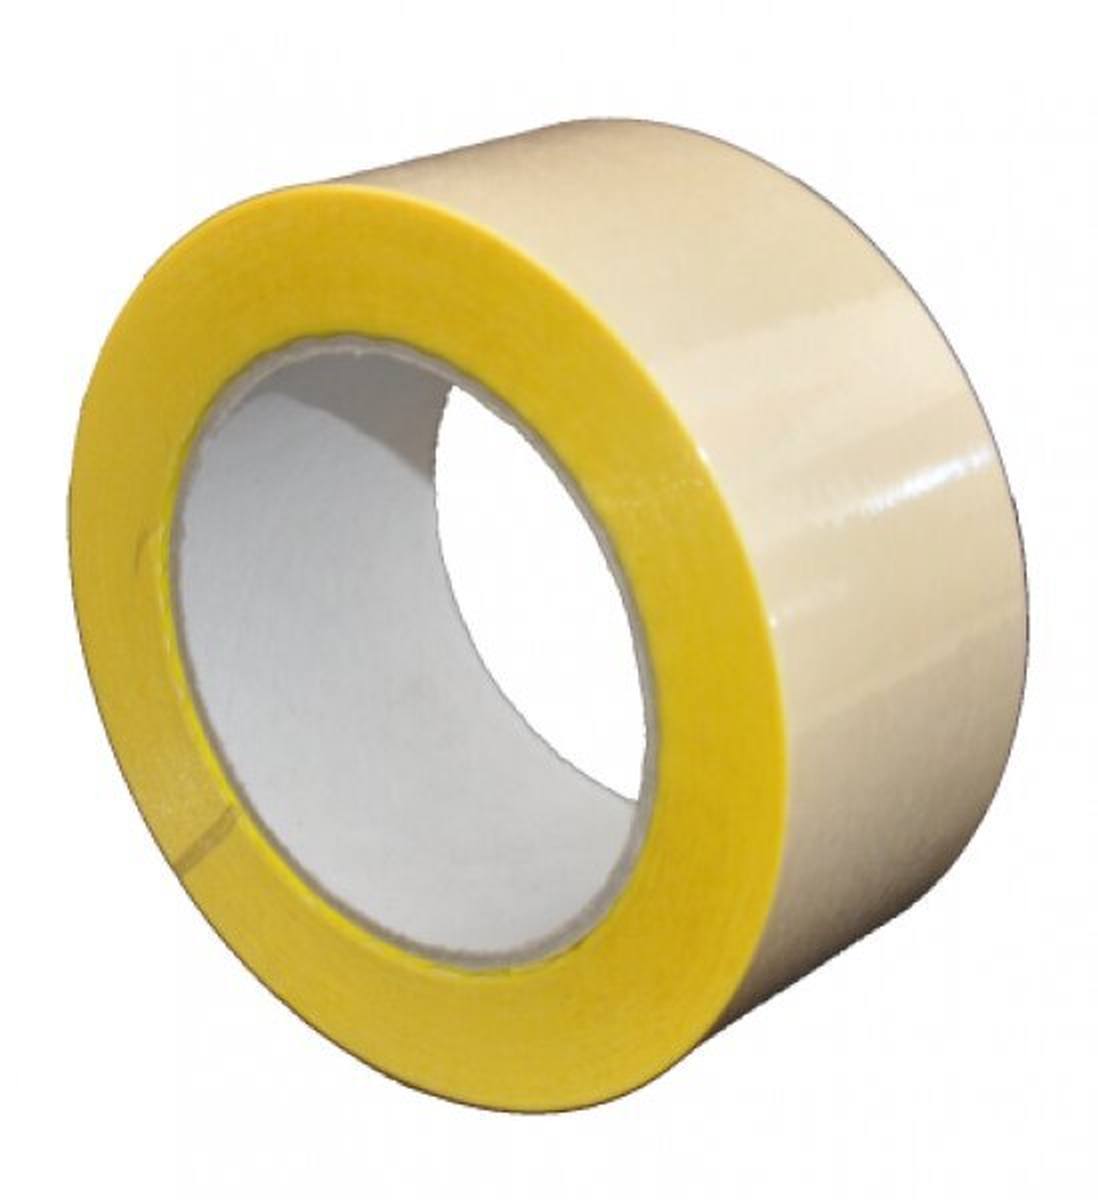 S-K-S 407 Double-sided adhesive tape with polypropylene backing, high / low tack, yellow, 500 mm x 50 m, 0.15 mm